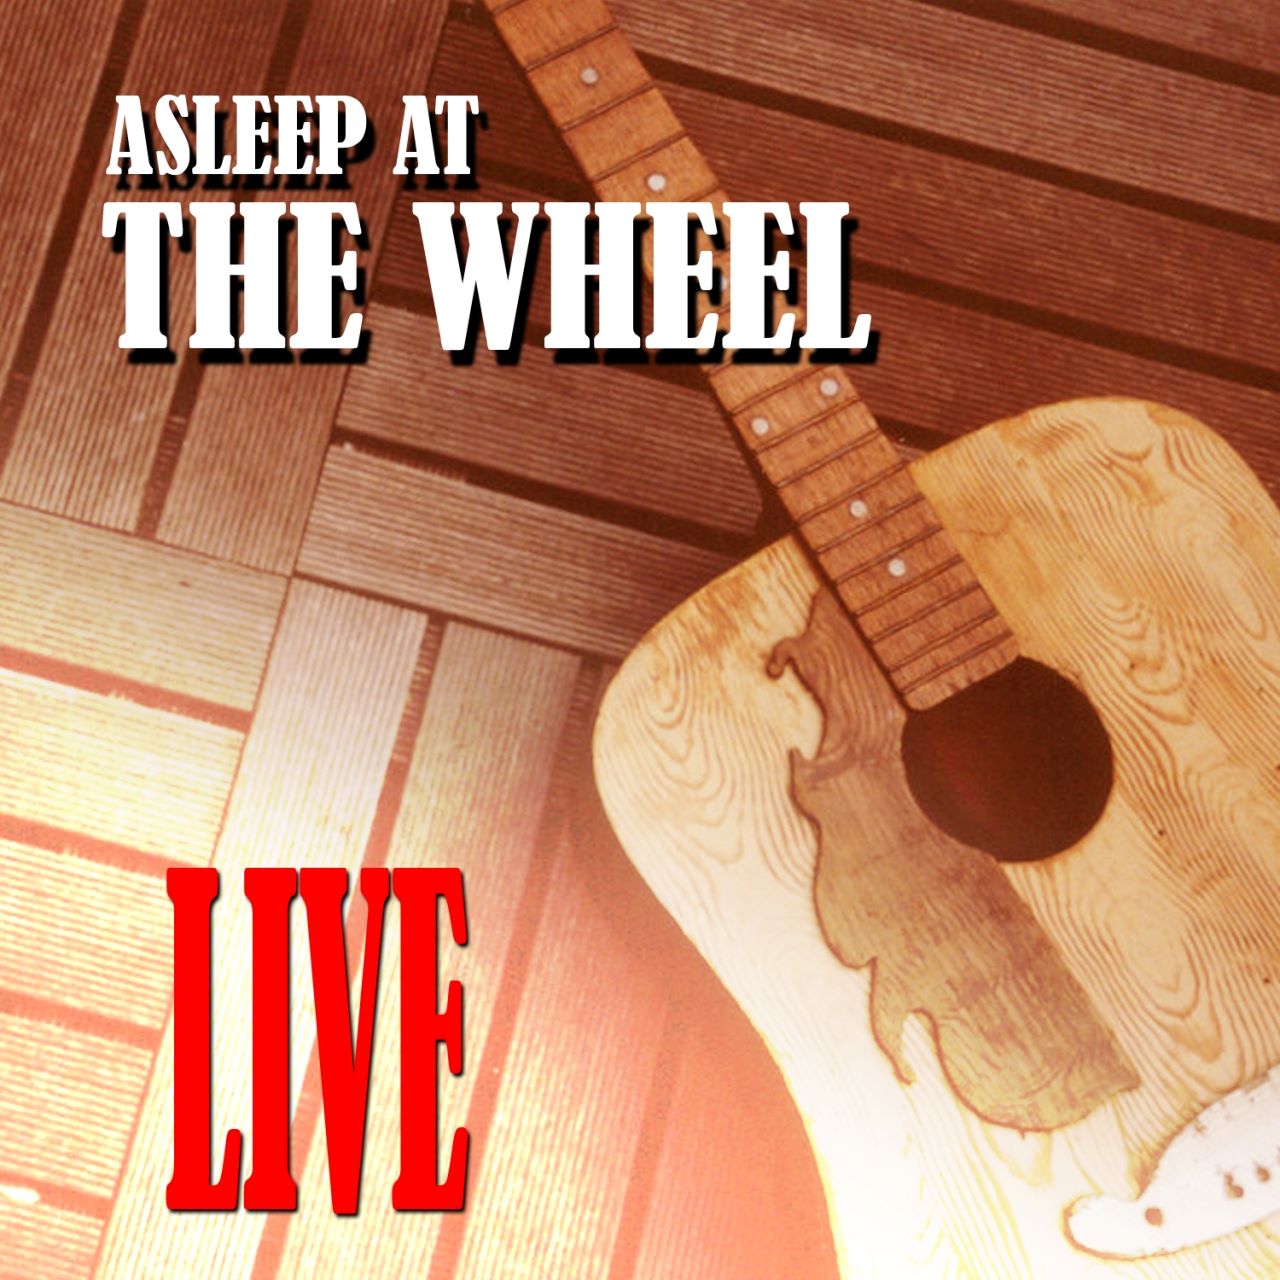 Asleep At The Wheel – Live cover album